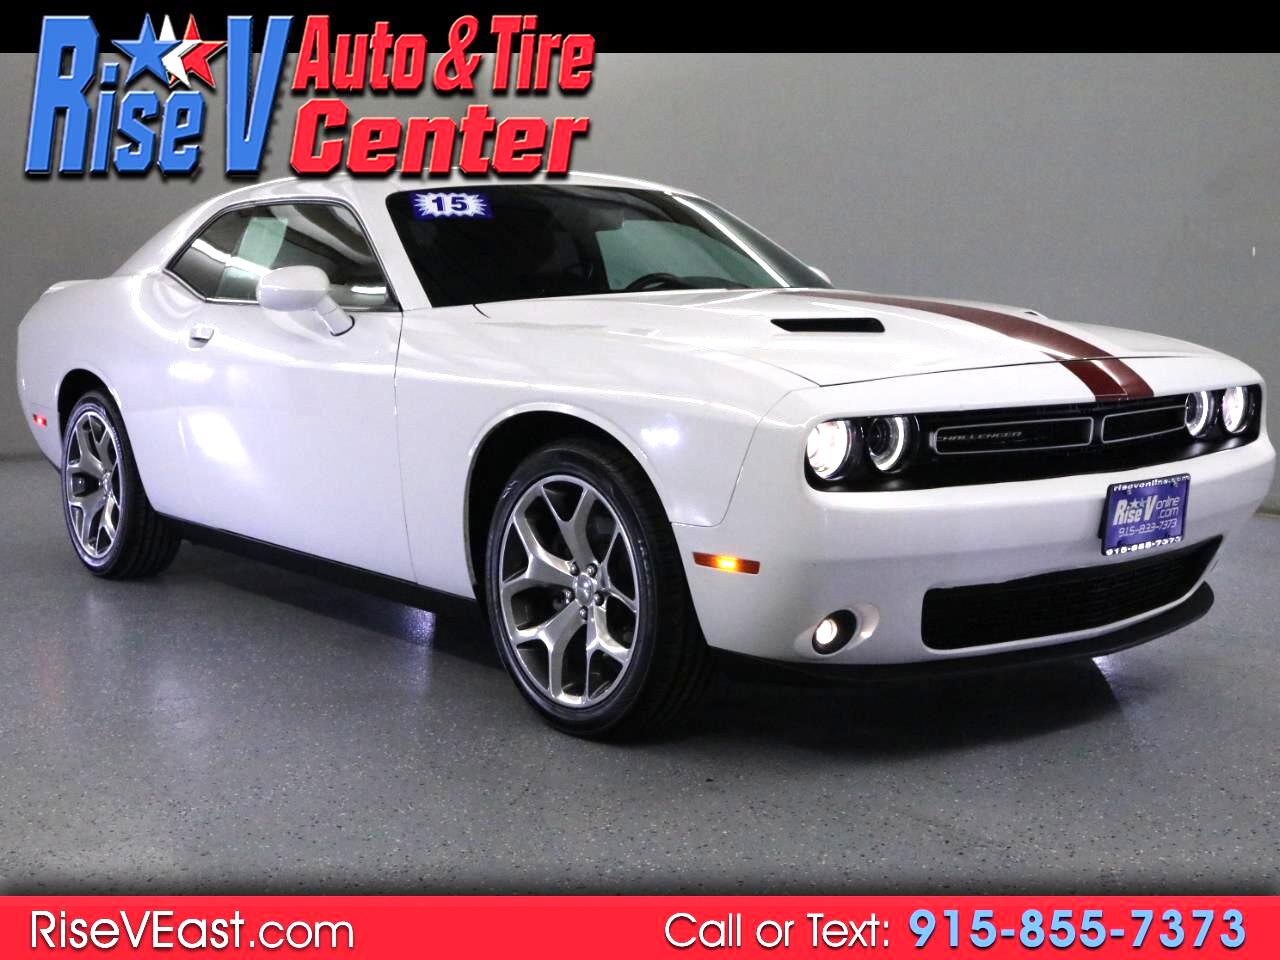 Used 2015 Dodge Challenger 2dr Cpe Sxt Plus For Sale In El